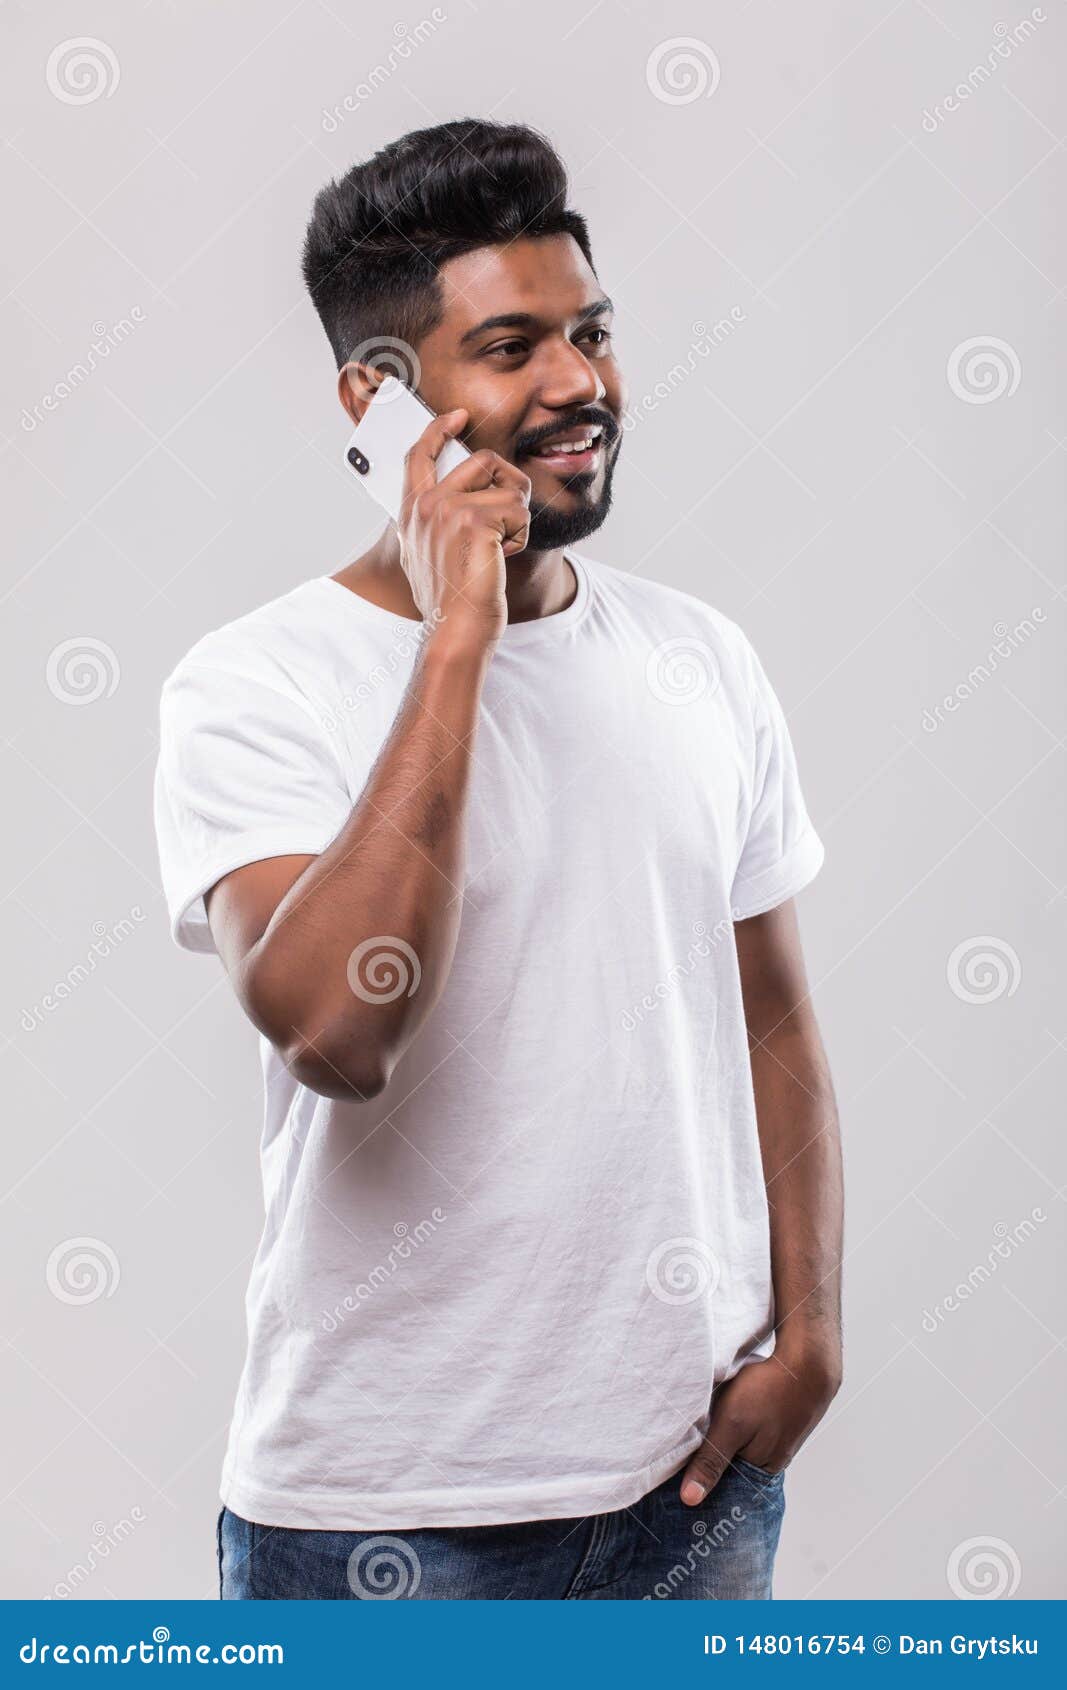 Young Handsome Indian Man Talking on Mobile Phone on White Background ...